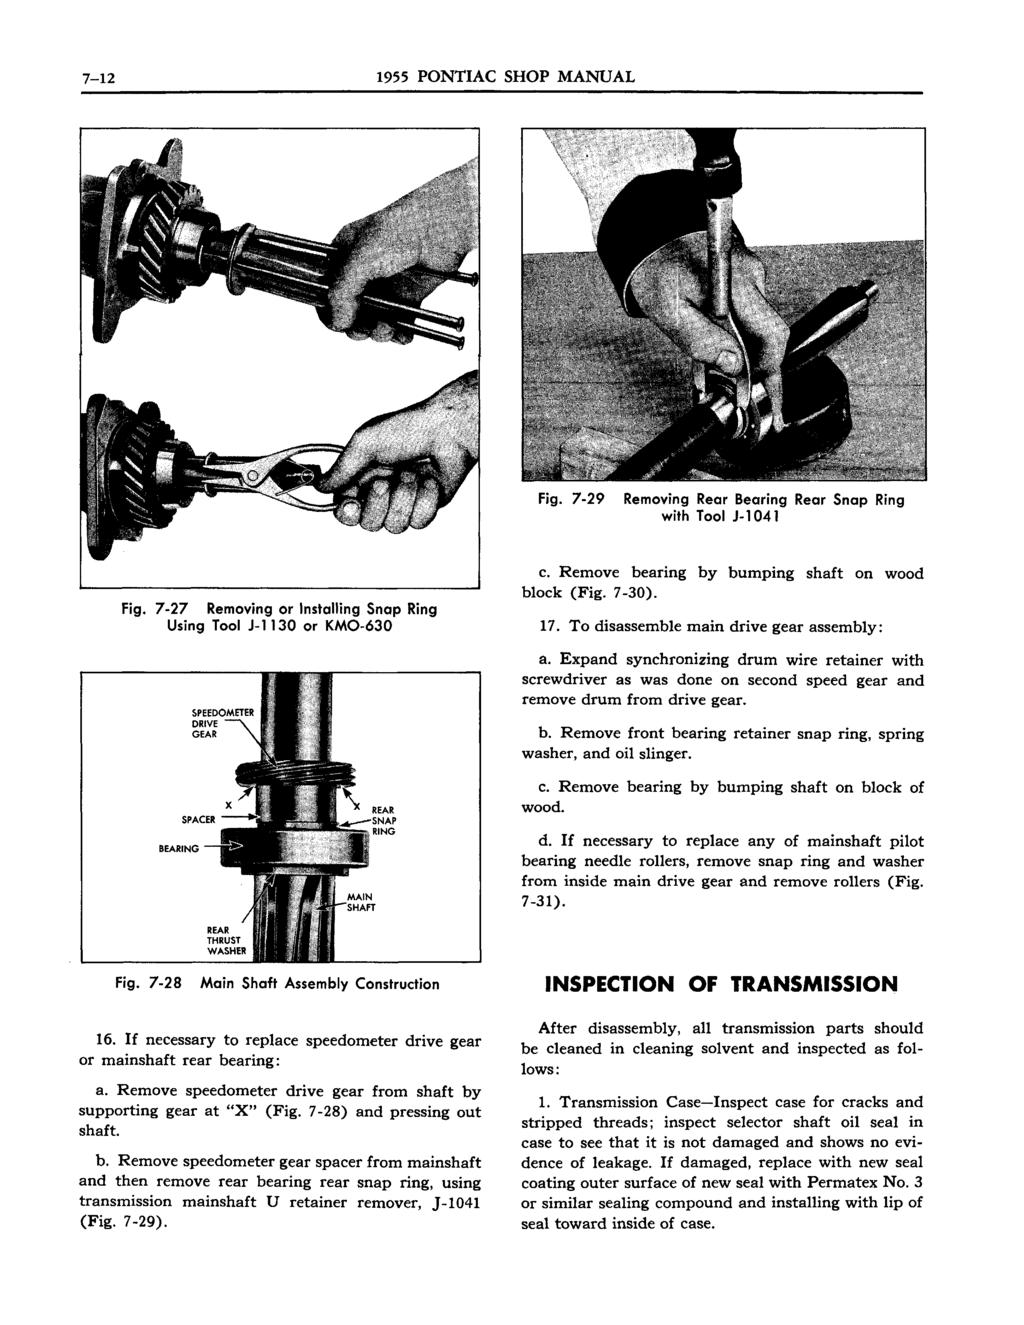 7-12 1955 PONTIAC SHOP MANUAL Fig. 7-29 Removing Rear Bearing Rear Snap Ring with Tool J-1041 Fig. 7-27 Removing or Installing Snap Ring Using Tool J-1130 or KMO-630 c.